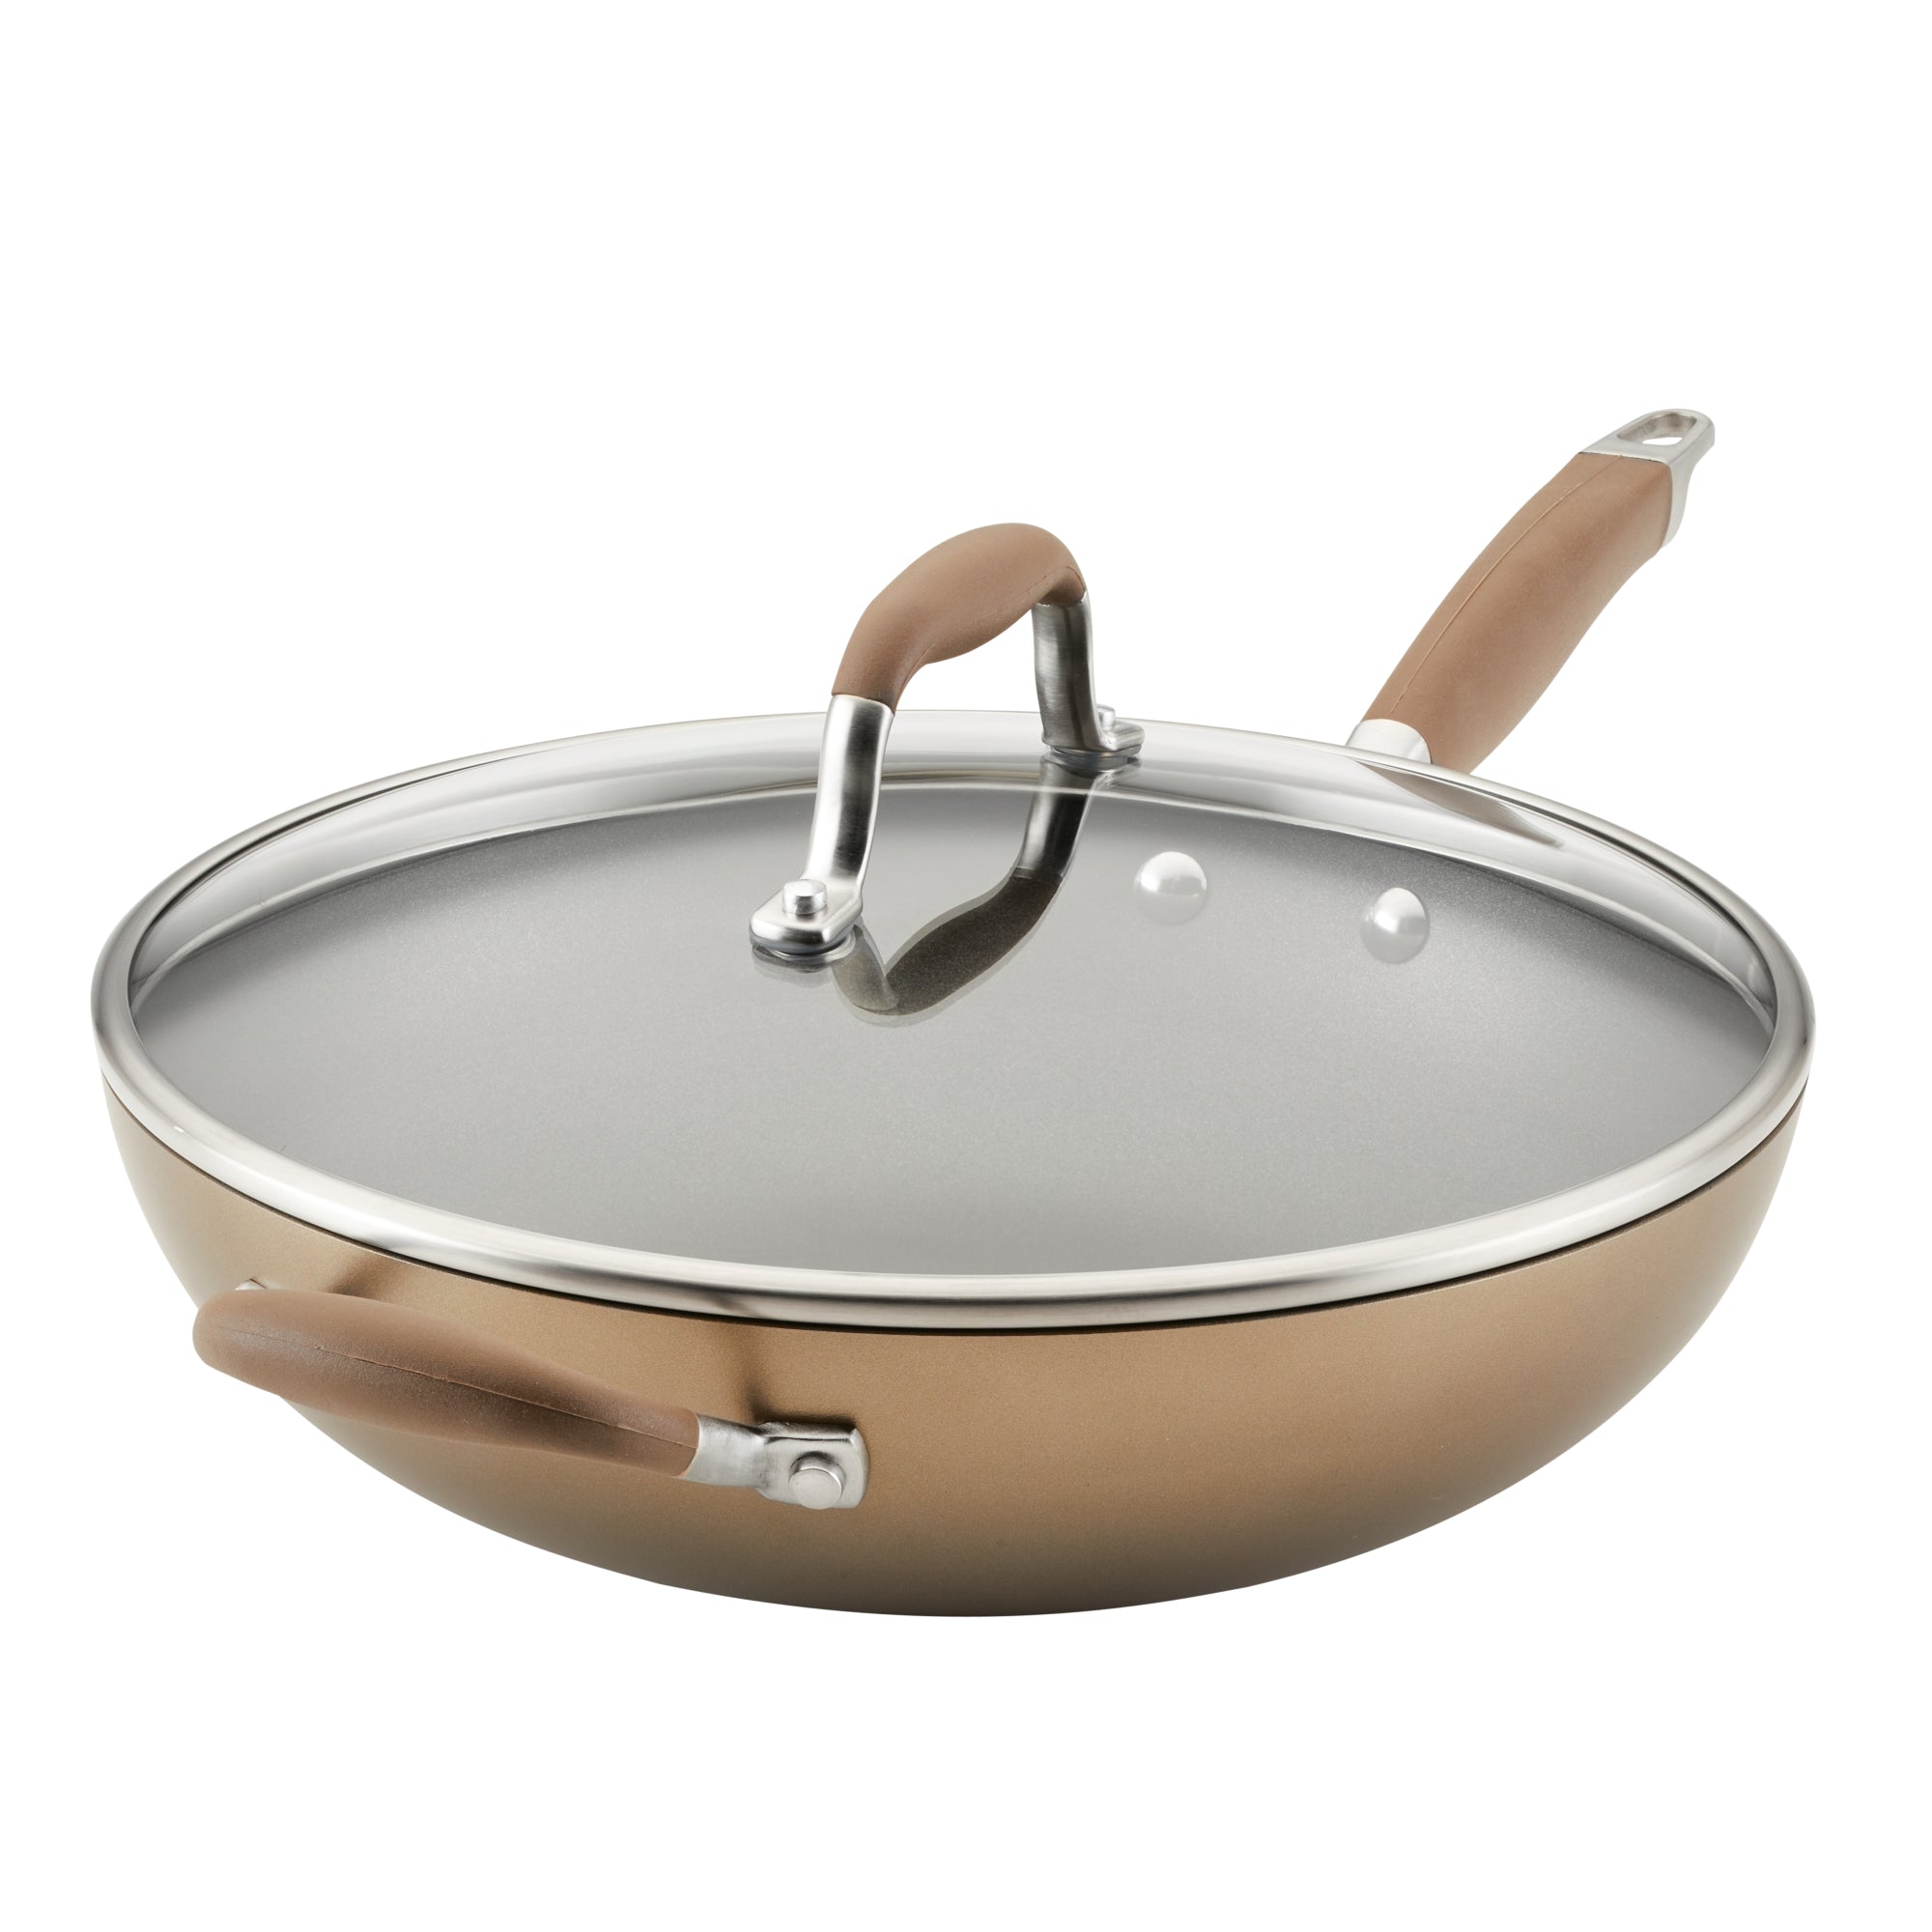 Anolon Advanced Home Hard-Anodized 12 Nonstick Ultimate Pan Moonstone 